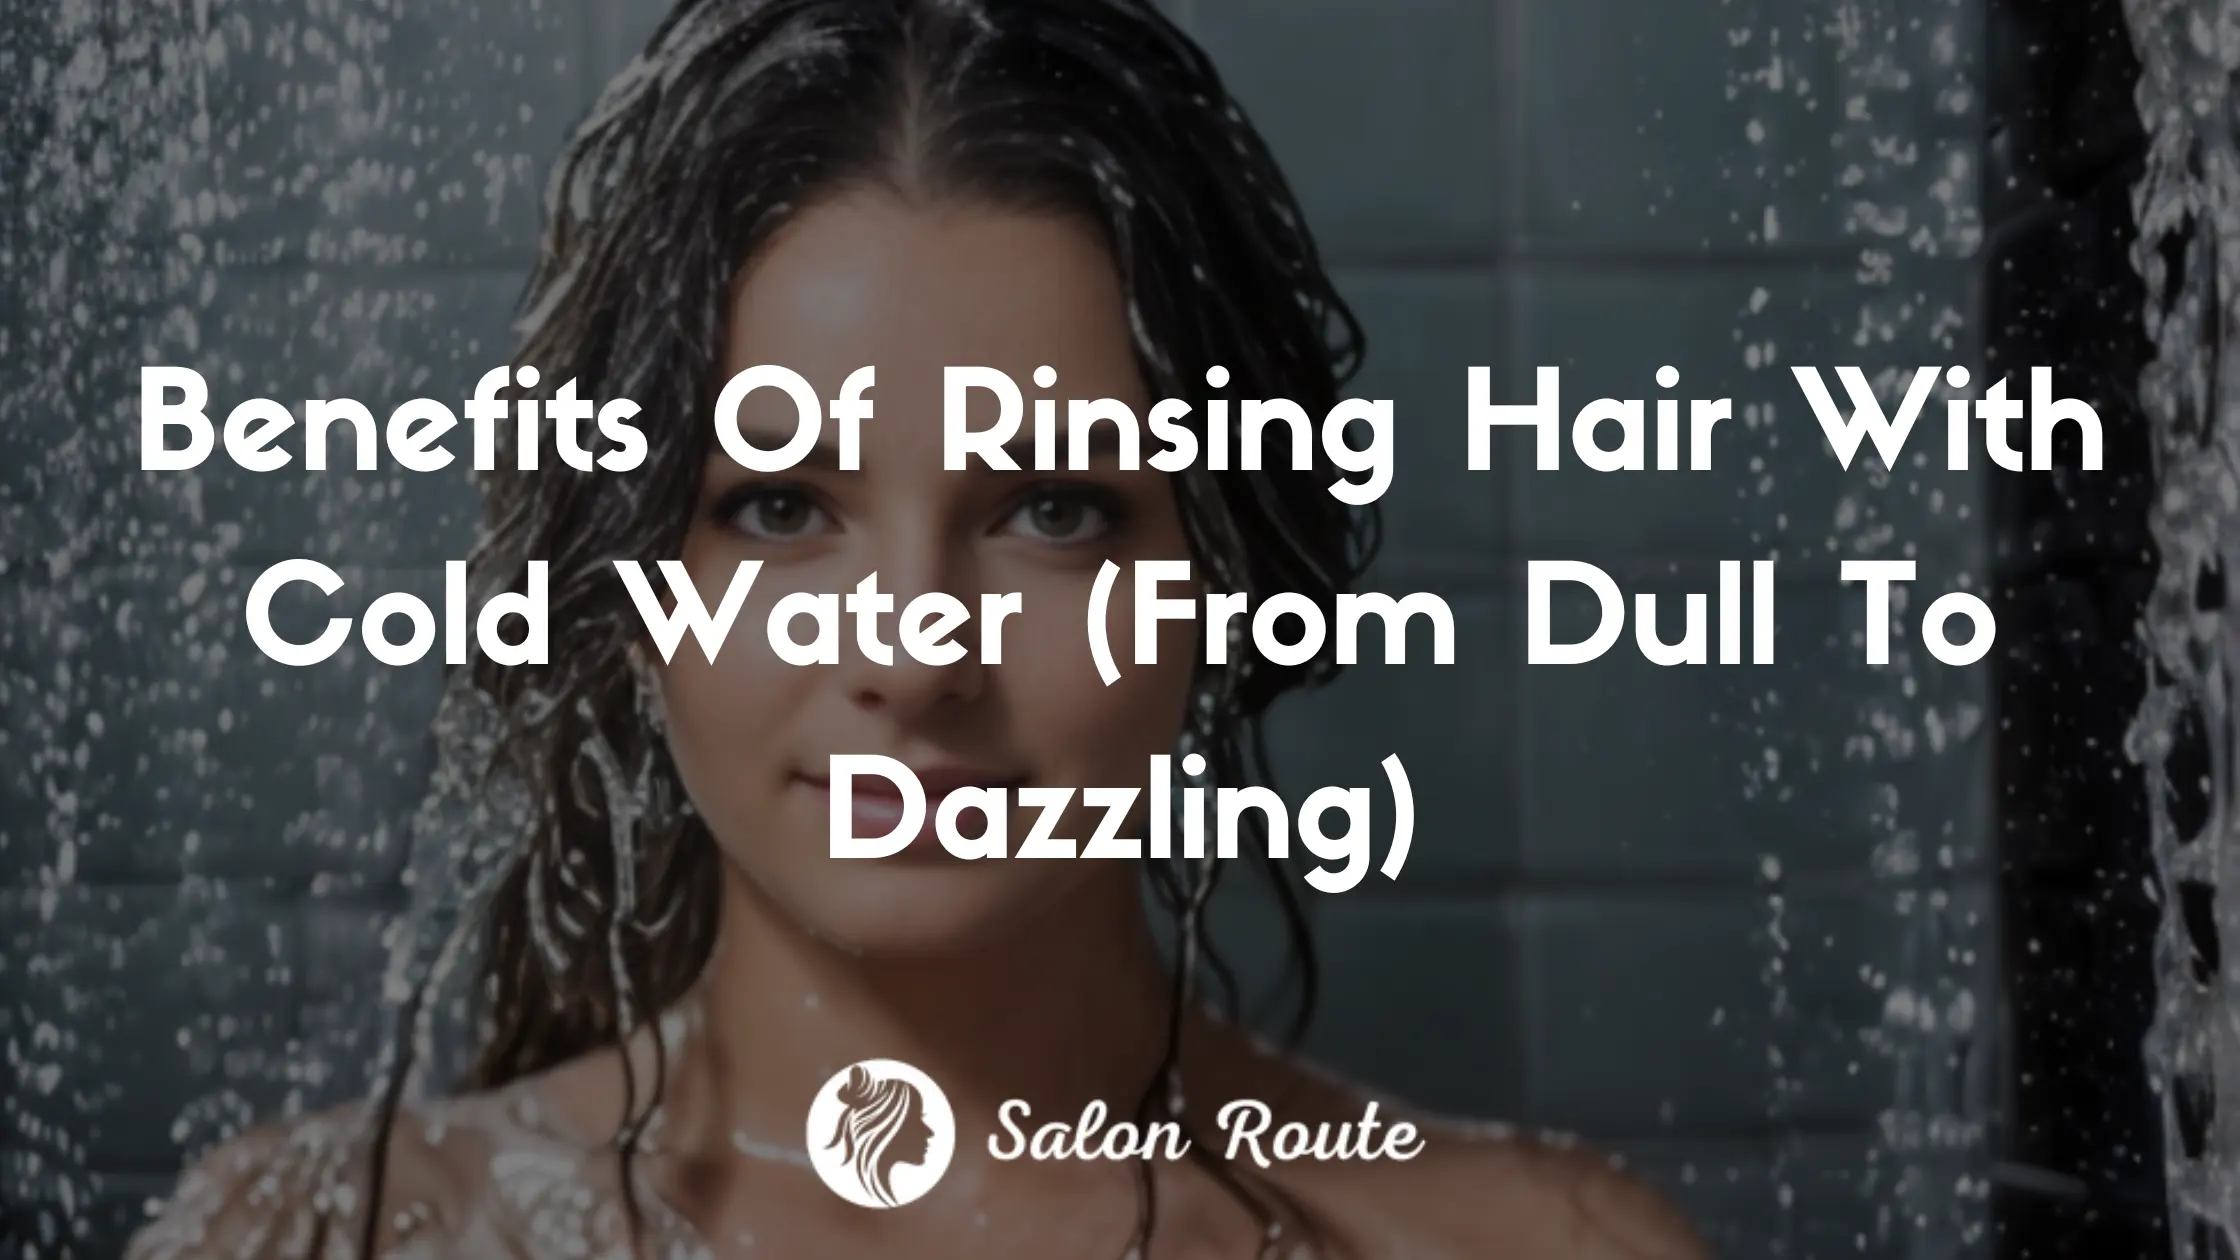 Benefits Of Rinsing Hair With Cold Water (From Dull To Dazzling)